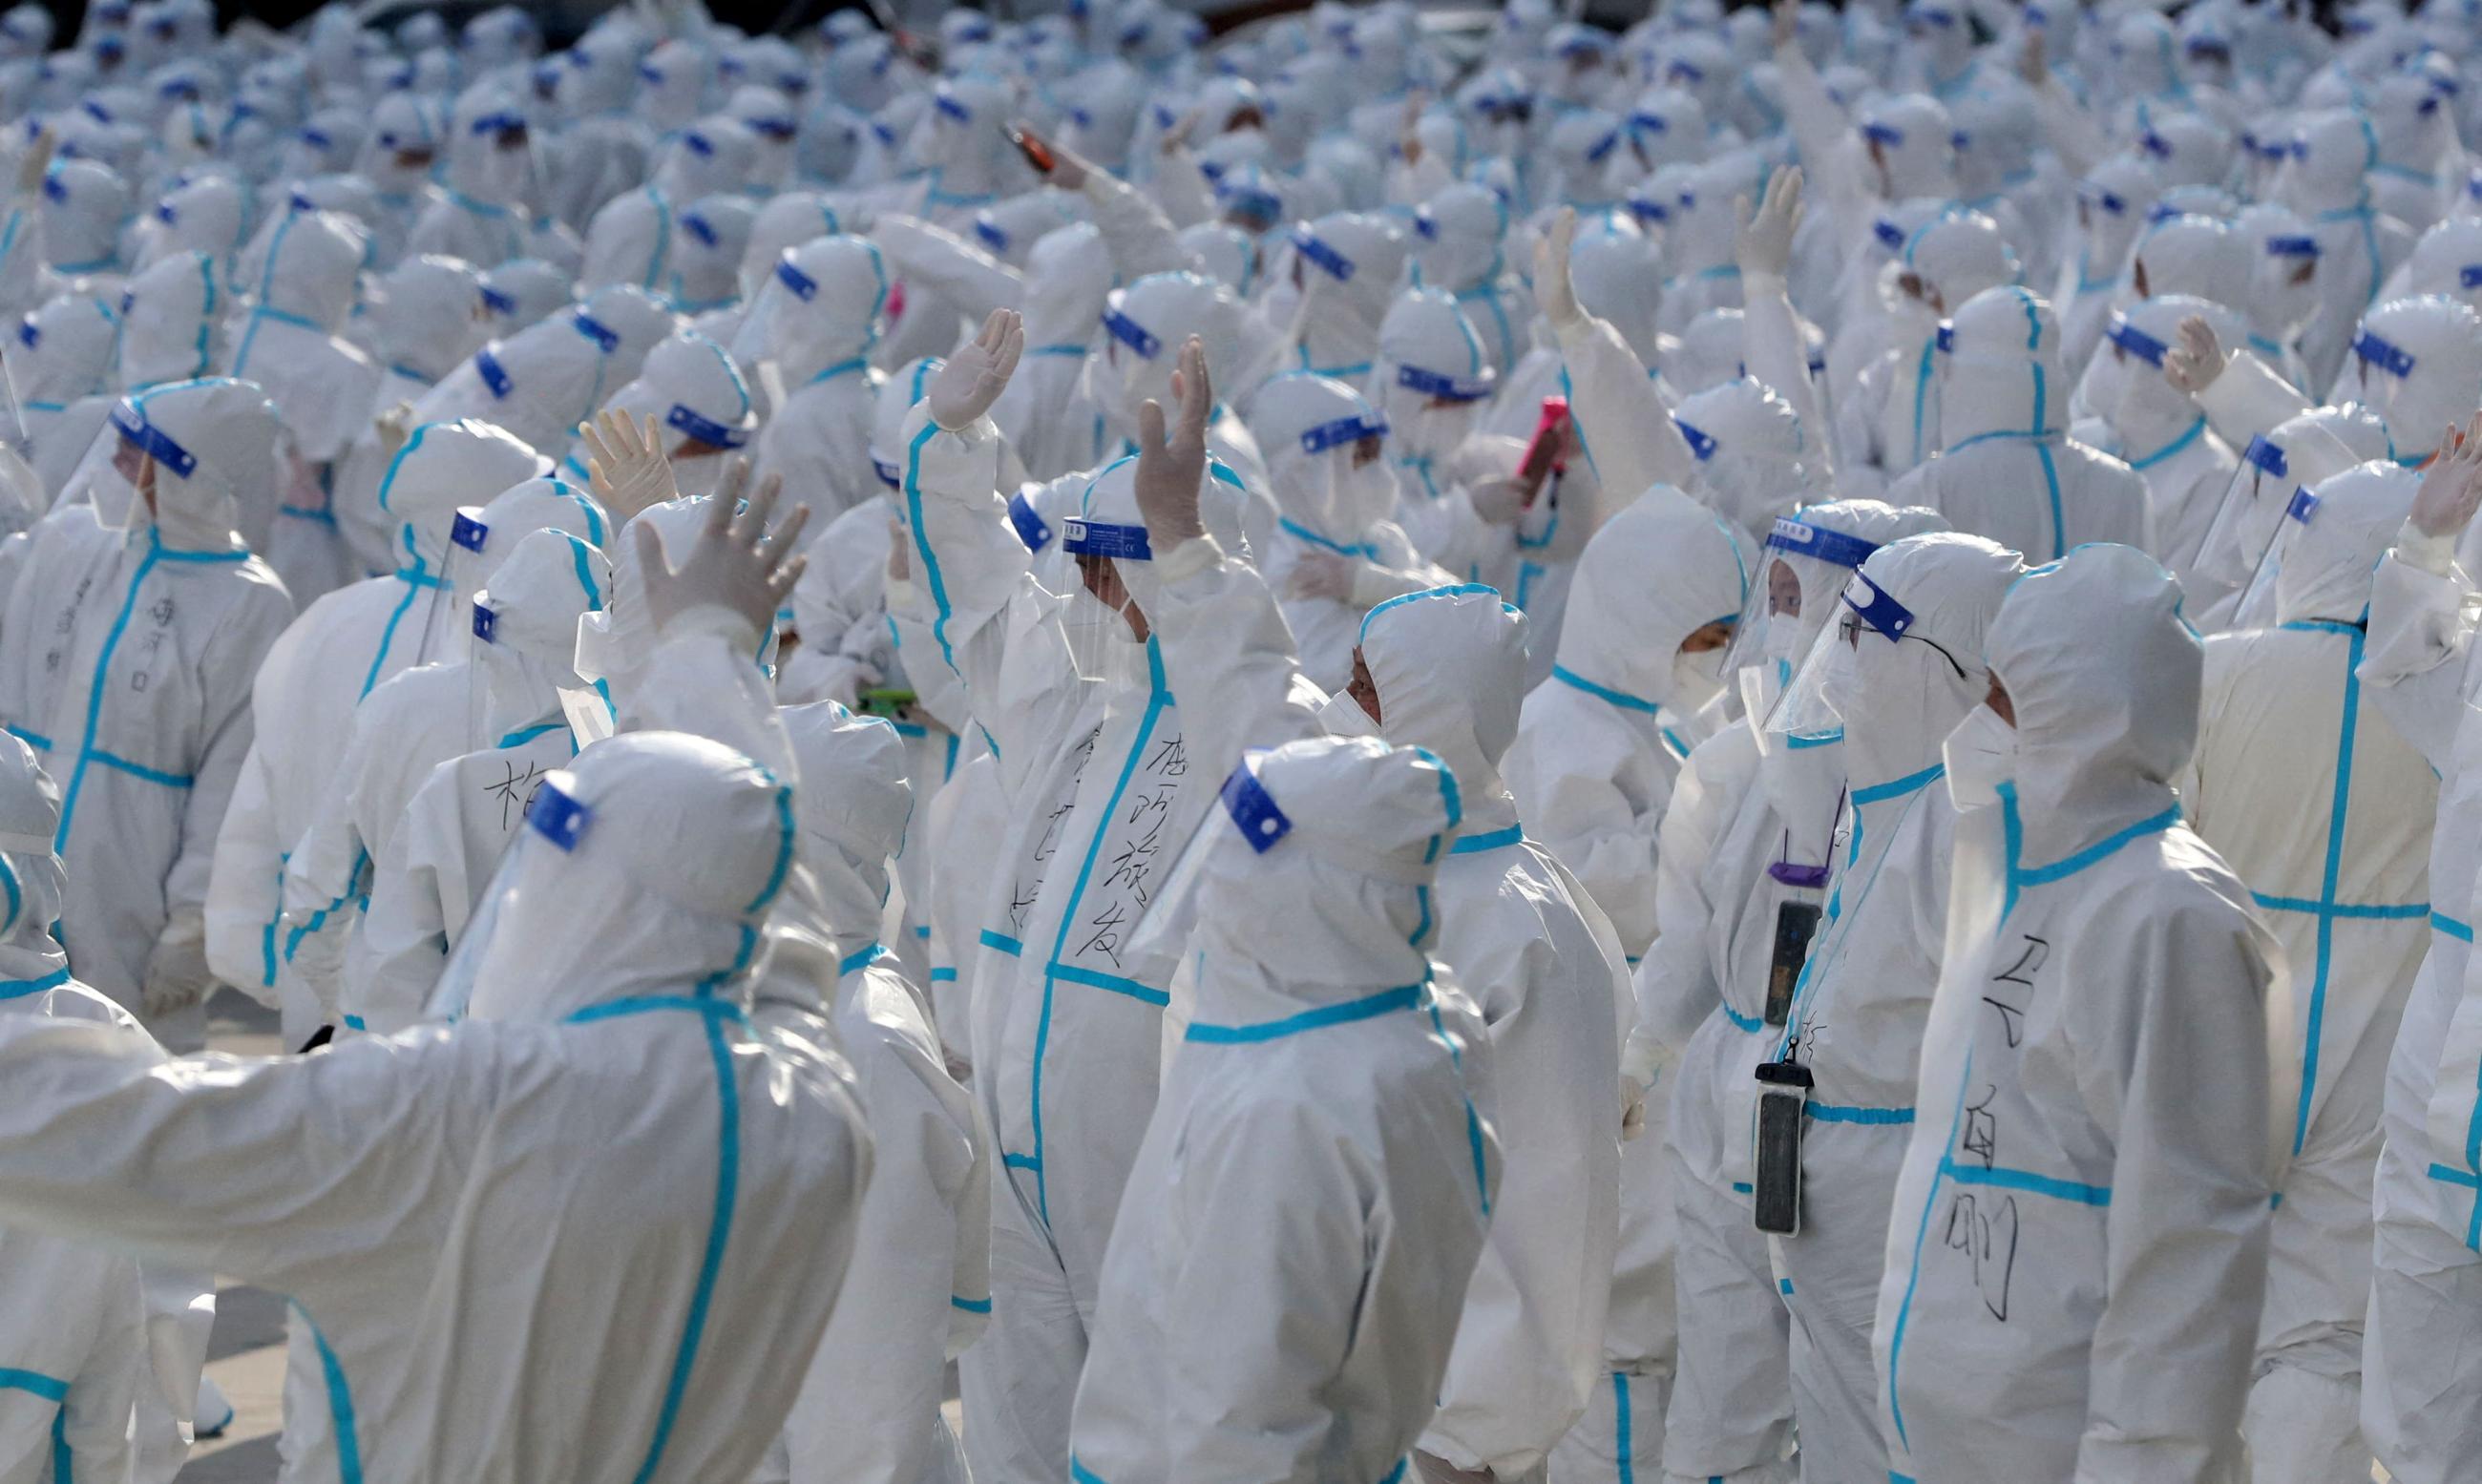 Medical workers in protective suits wave at Changchun residents during a farewell ceremony before returning to Meihekou, where they were dispatched from to help curb the coronavirus disease (COVID-19) outbreak in Changchun, Jilin Province, China, April 12, 2022